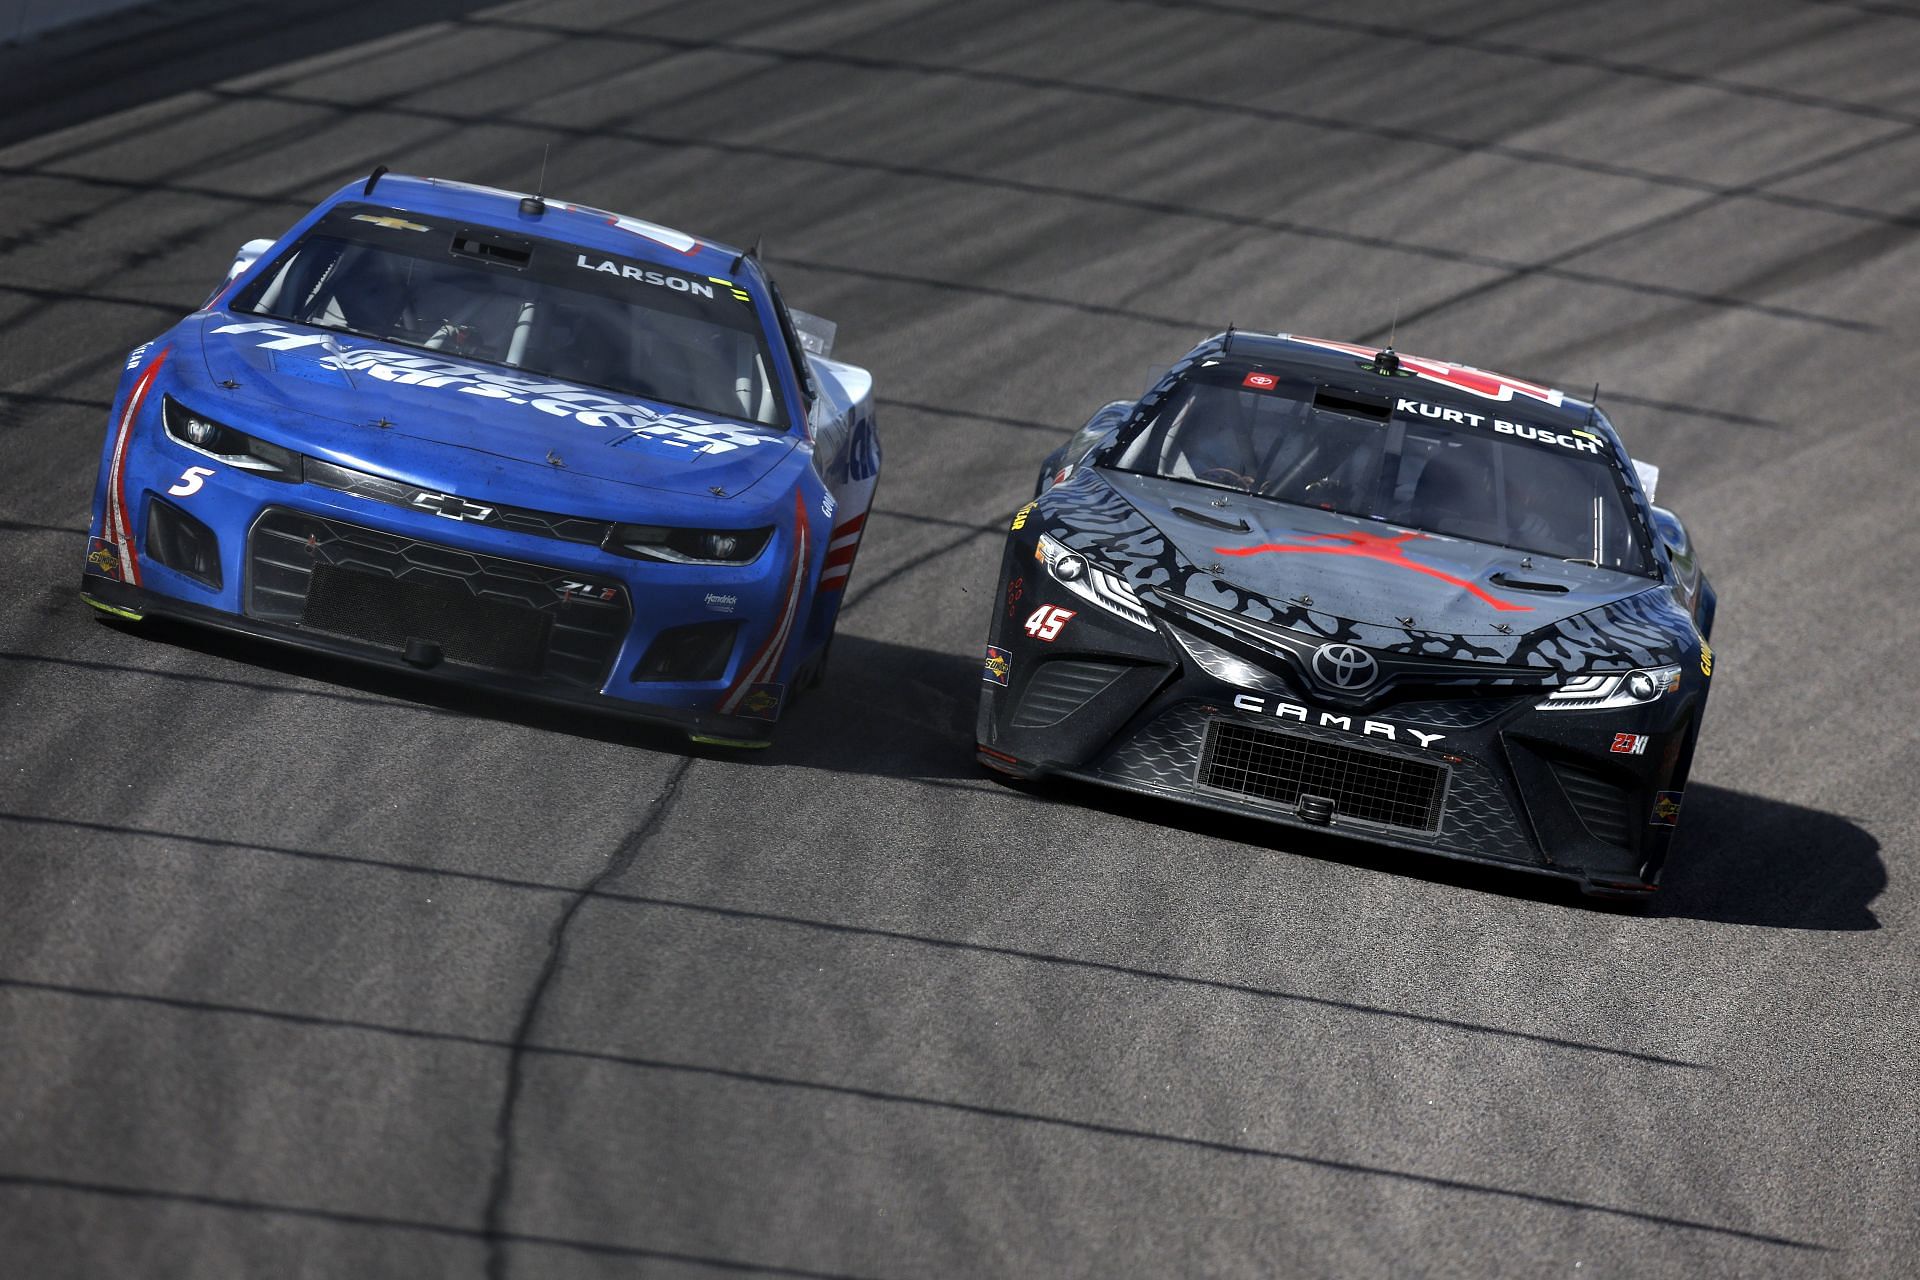 Kyle Larson (left) and Kurt Busch (right) race during the NASCAR Cup Series AdventHealth 400 at Kansas Speedway (Photo by Sean Gardner/Getty Images)